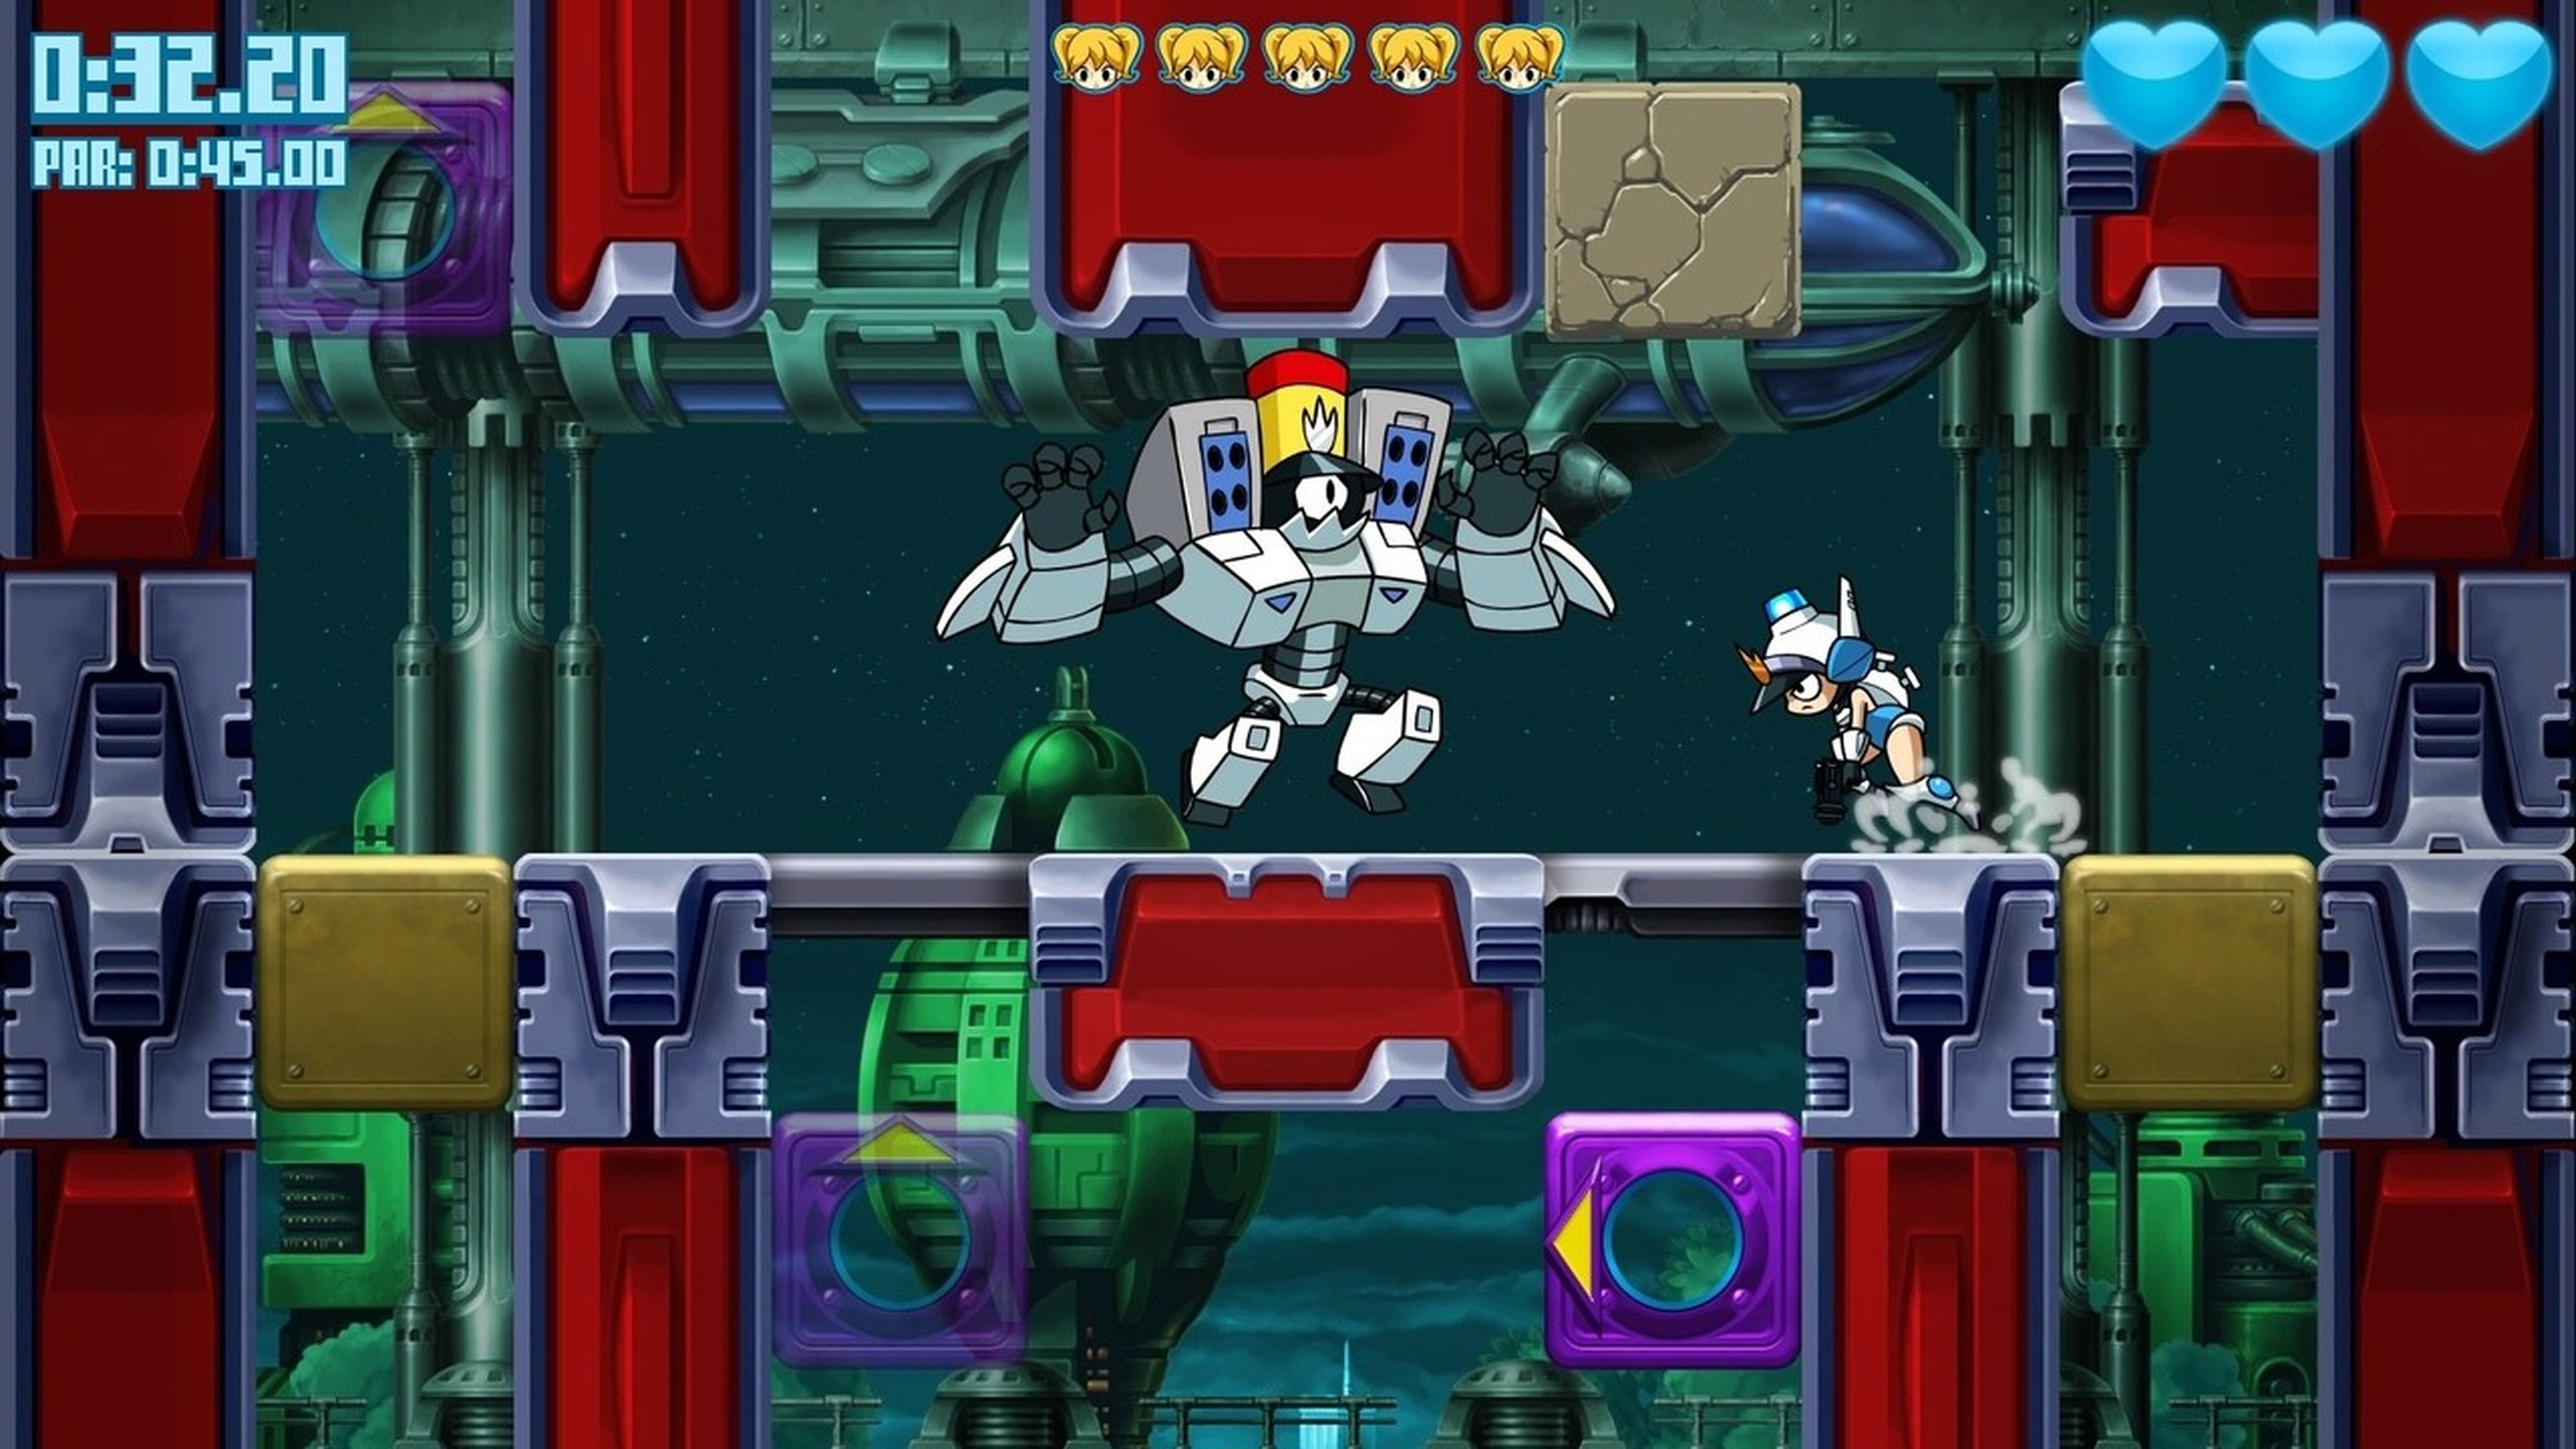 Análisis de Mighty Switch Force! HD Edition